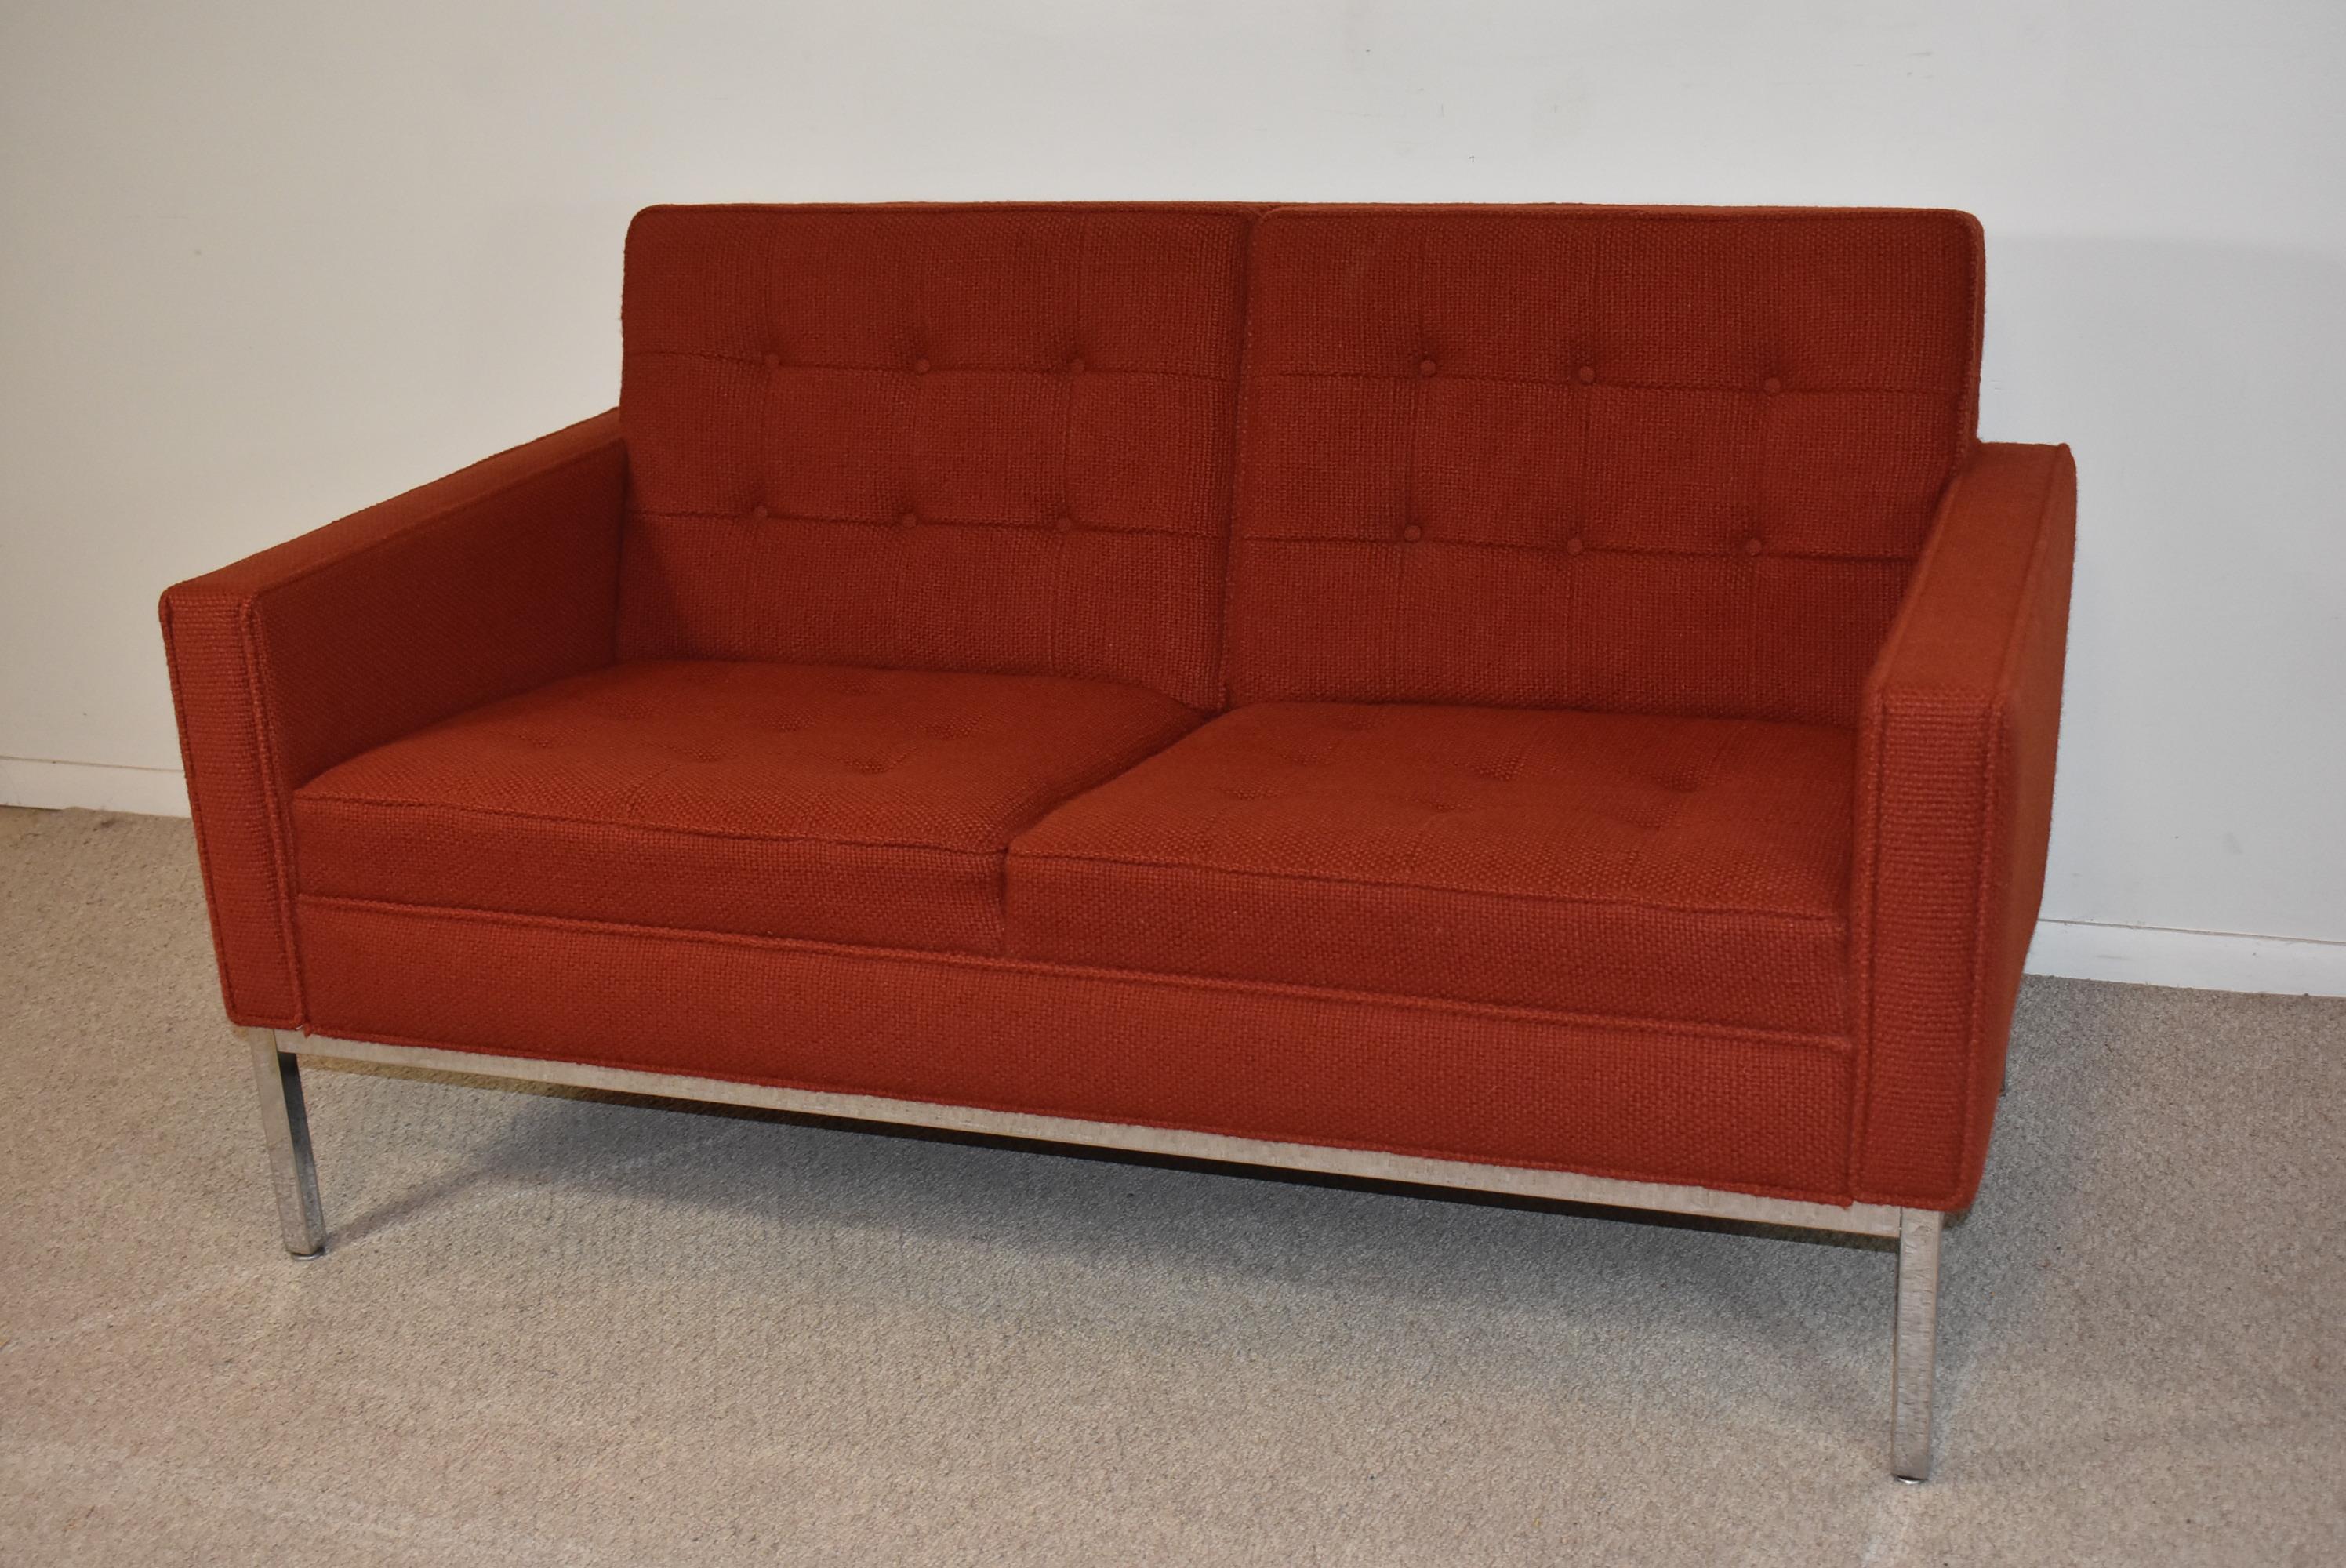 Knoll Loveseat with Burnt Orange Wool Upholstery and Chrome Legs In Good Condition For Sale In Toledo, OH